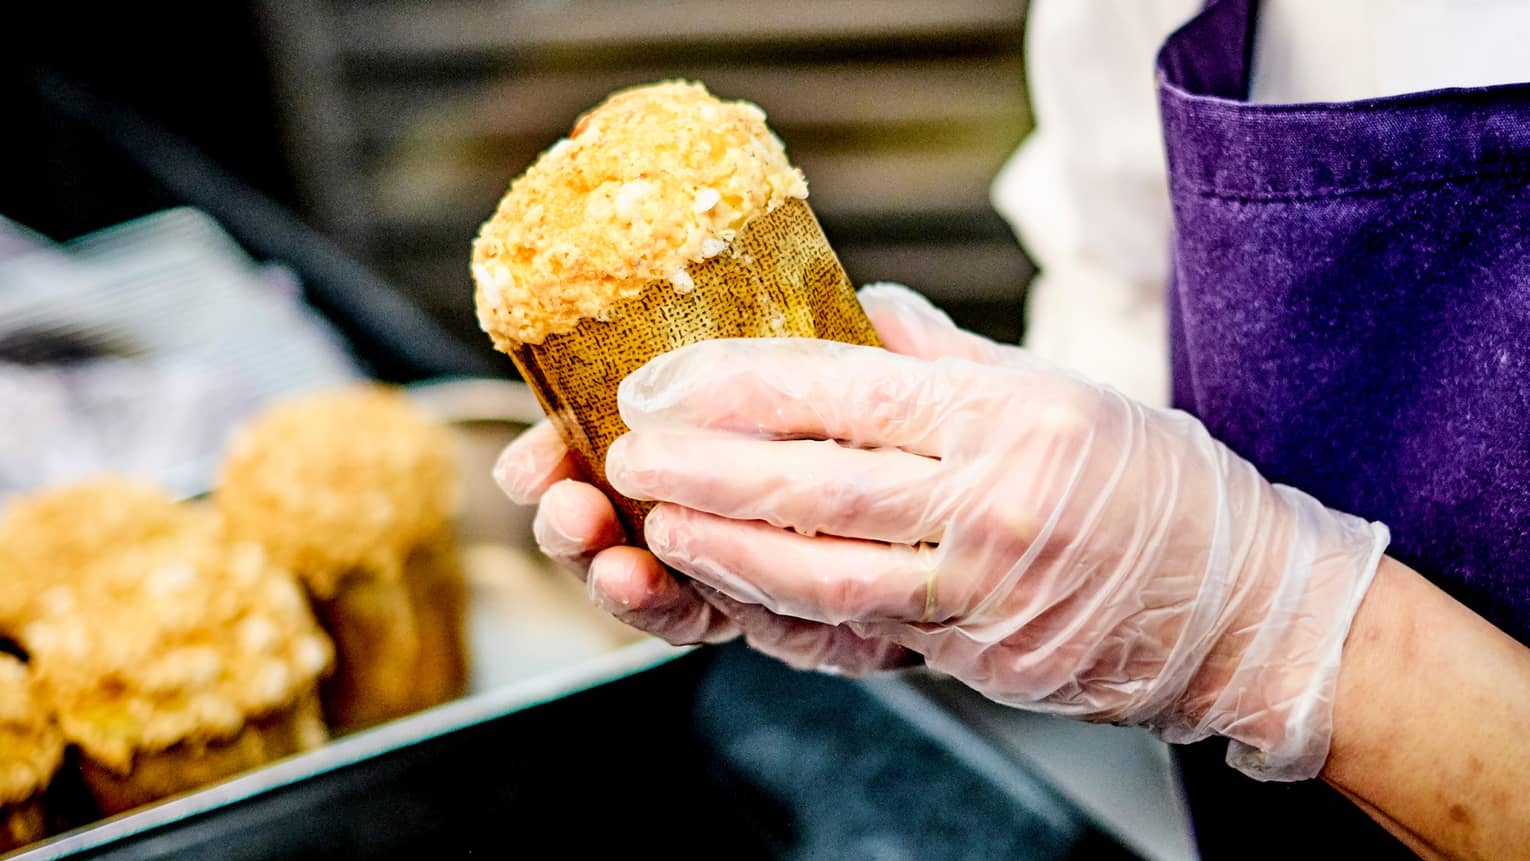 Close-up of chef pastry wearing gloves, holding rolled baked goods